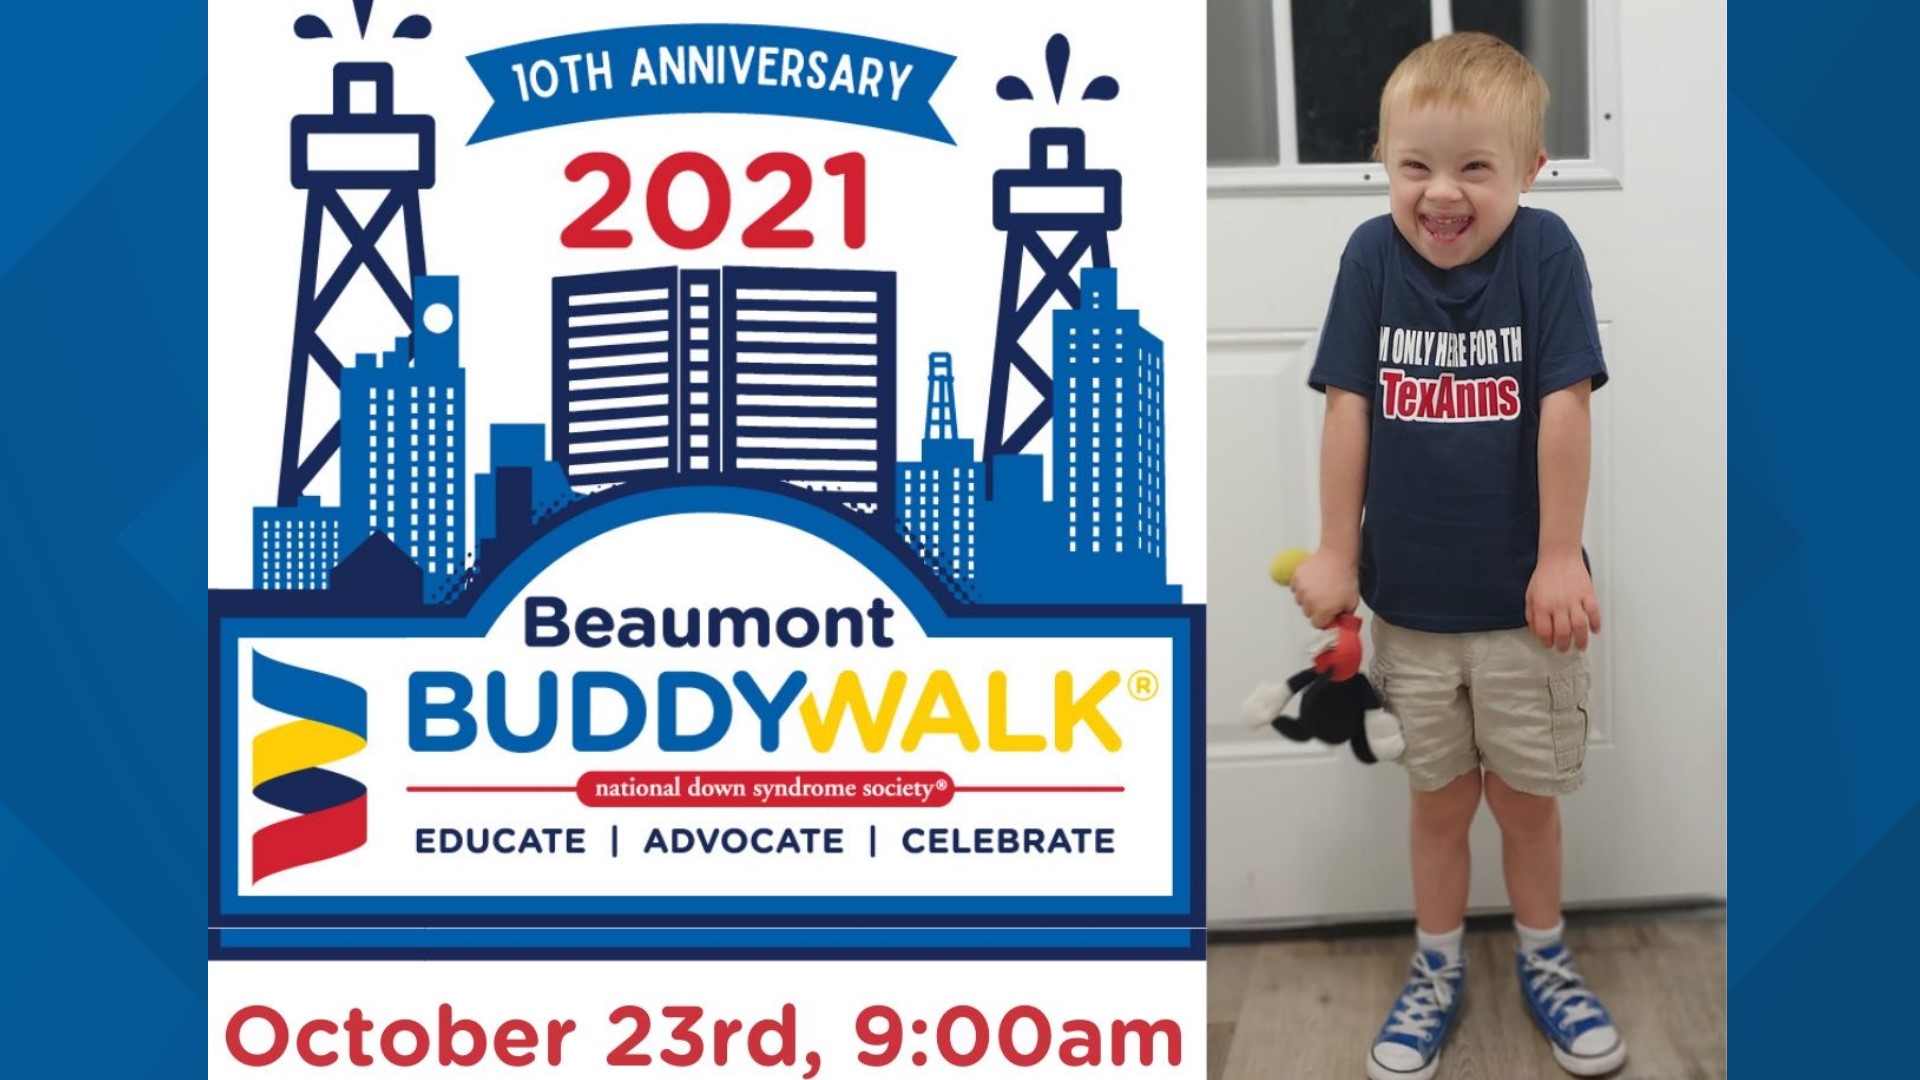 The Buddy Walk in Beaumont is an inspirational and educational event that celebrates the many abilities and accomplishments of people with Down syndrome.